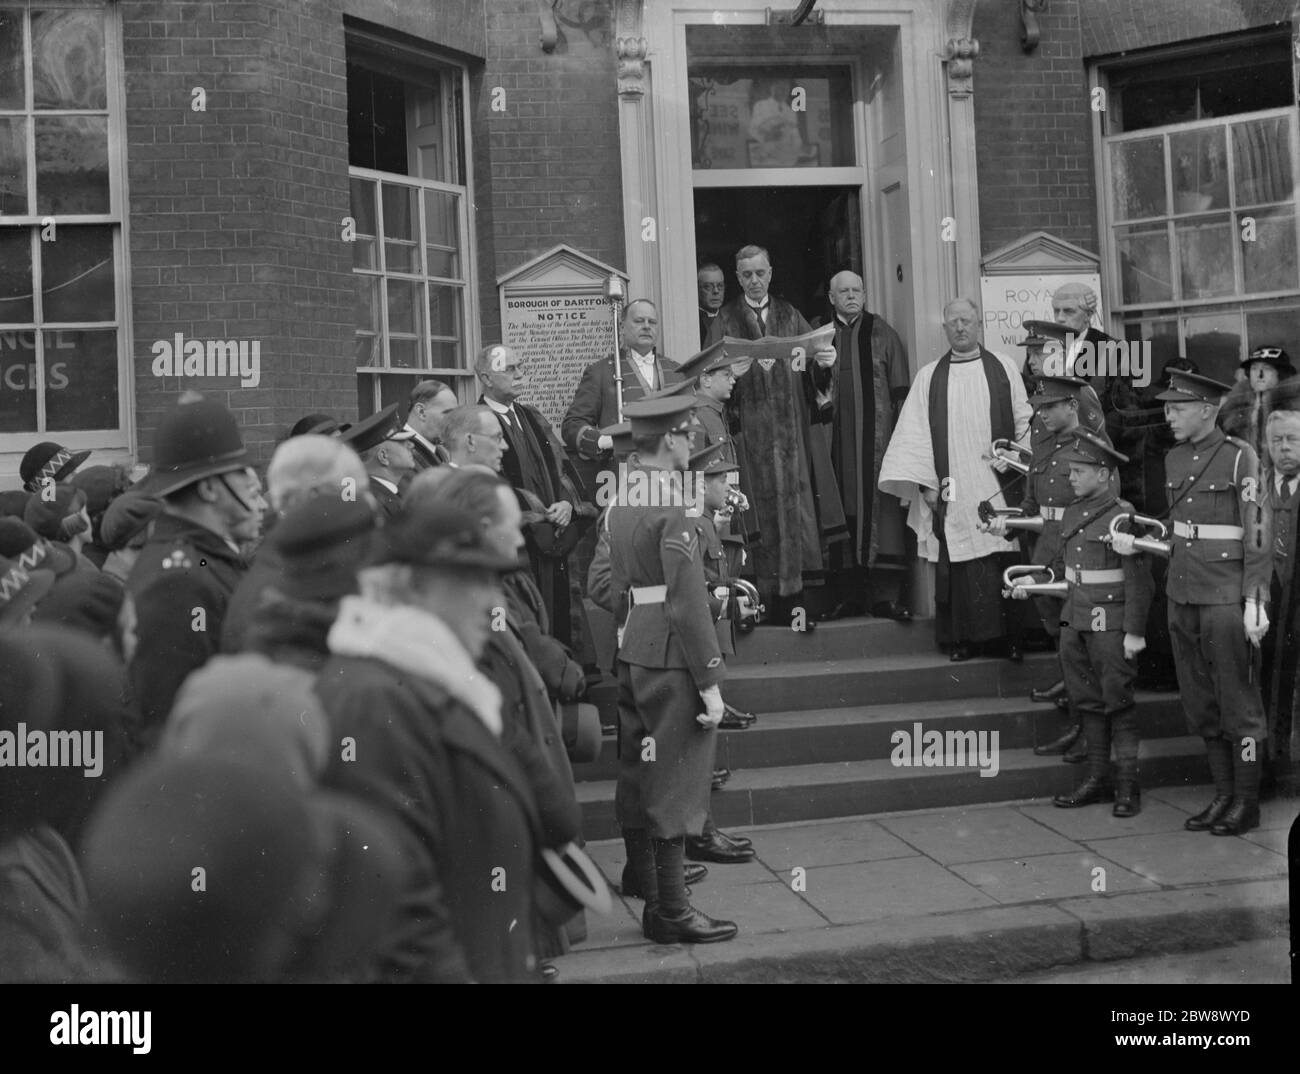 Announcing the new King in Dartford . The Royal Proclamation of the accession of Edward VIII is read out in Dartford , Kent . 1936 Stock Photo